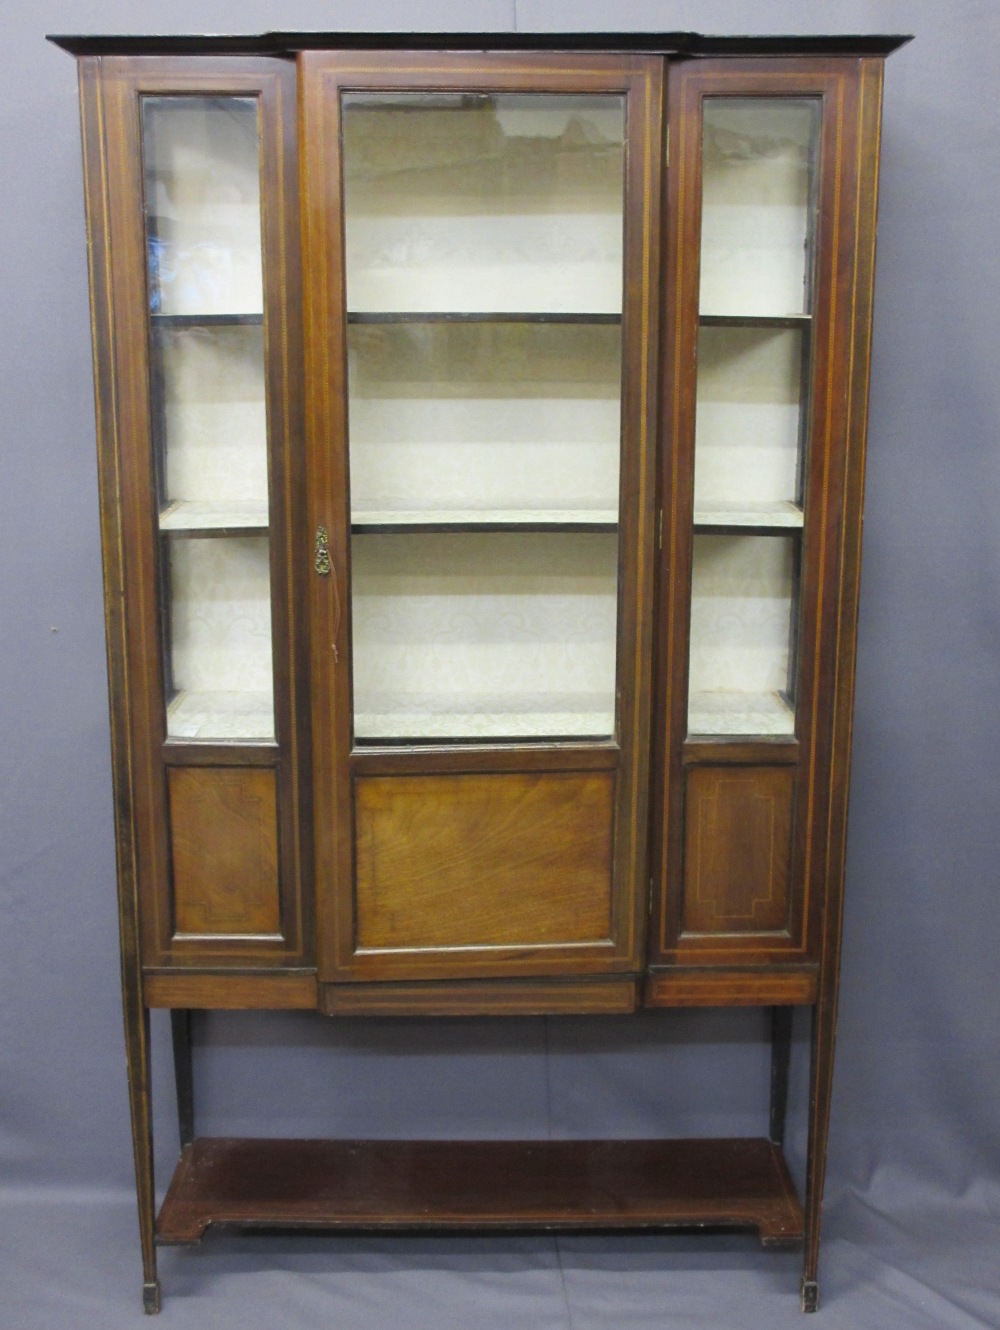 MAHOGANY INLAID BREAKFRONT DISPLAY CABINET, single door, with floral upholstered shelves and back,